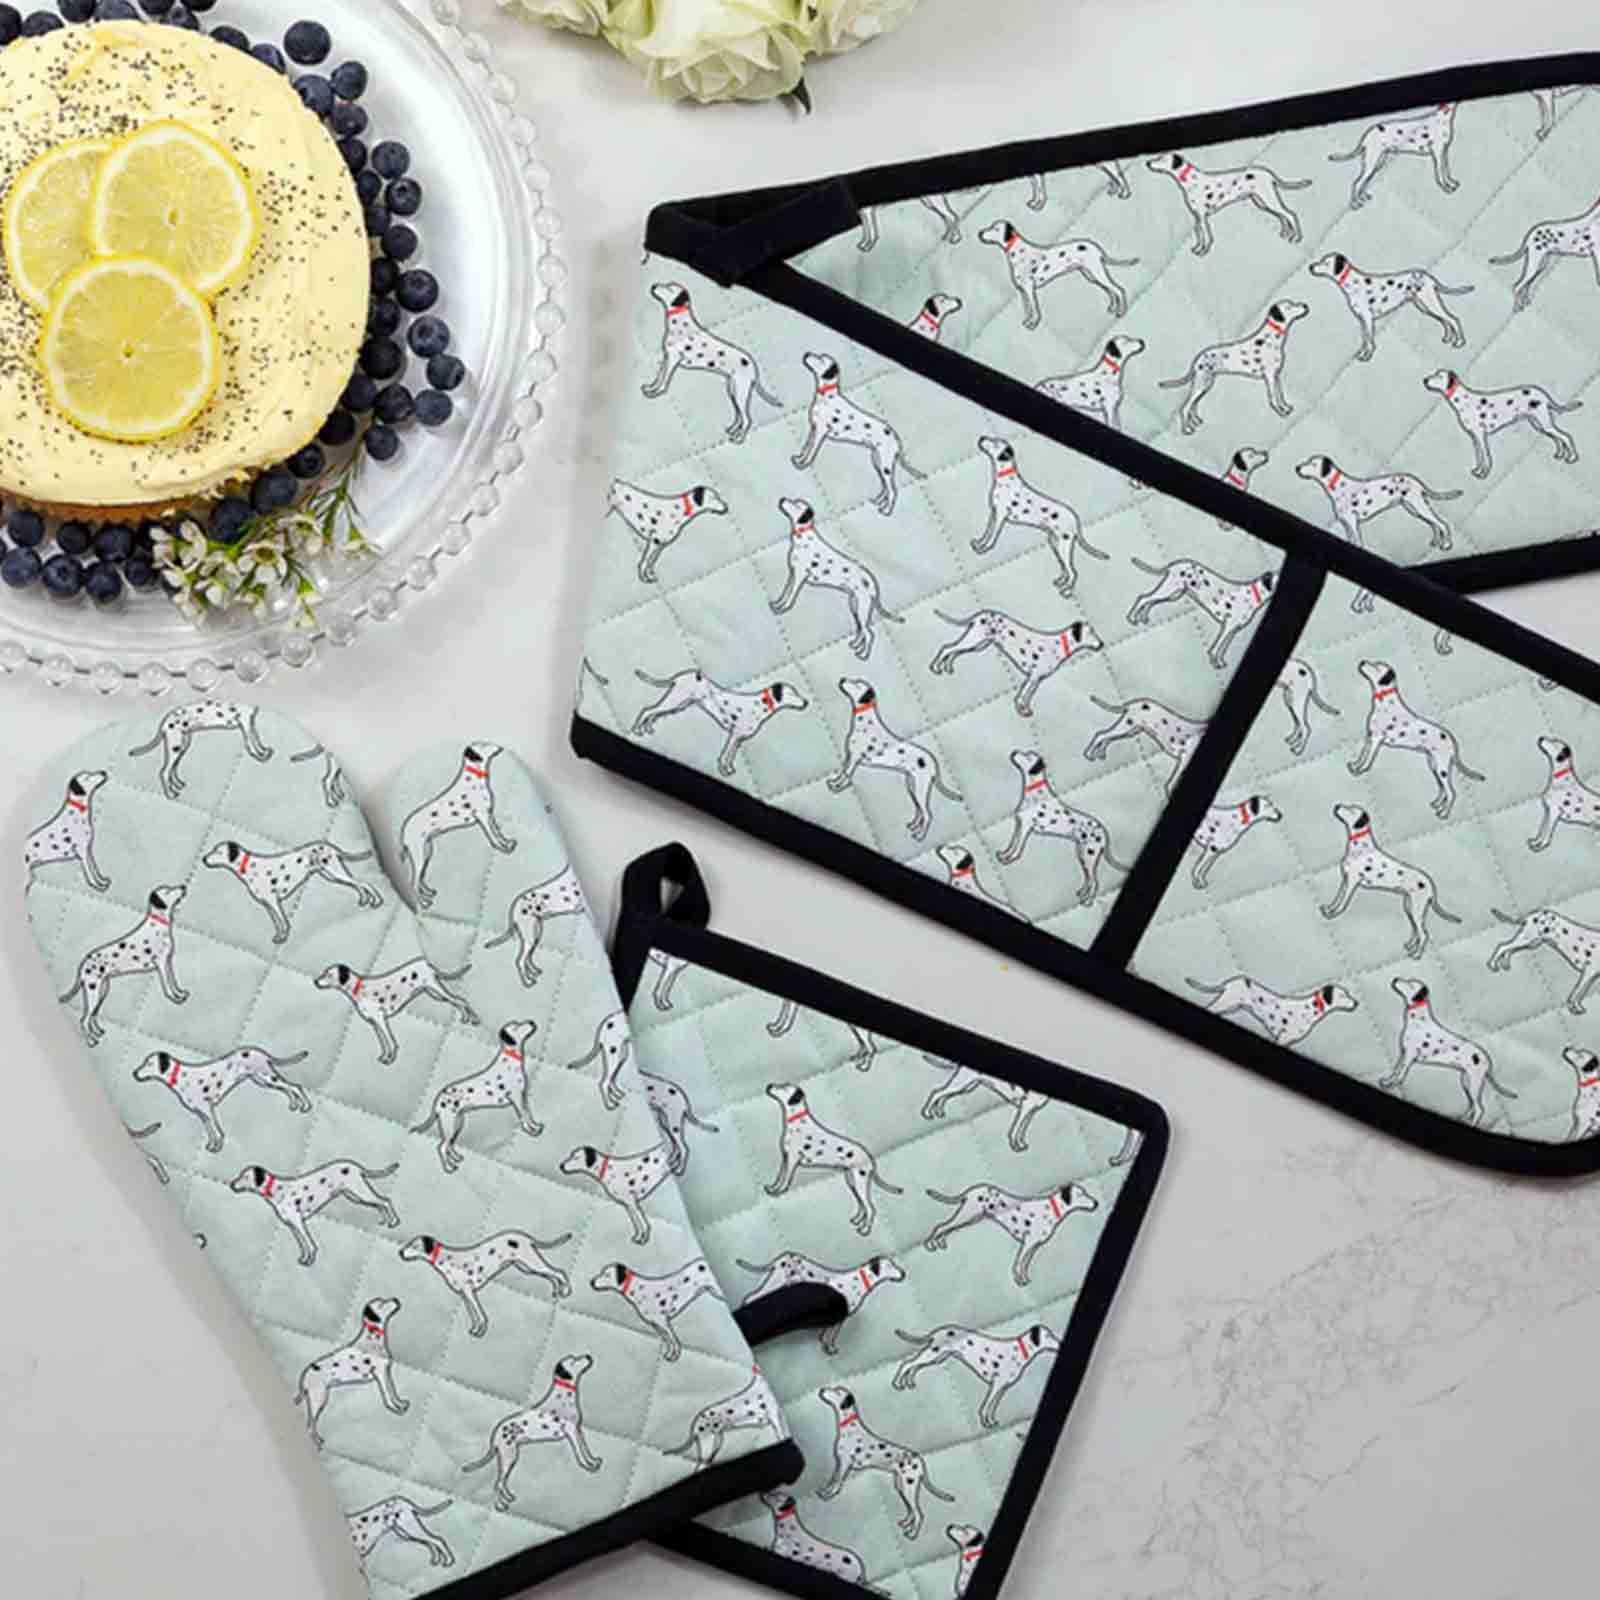 Dalmations 100% Cotton Oven Glove and Pot Holder Set